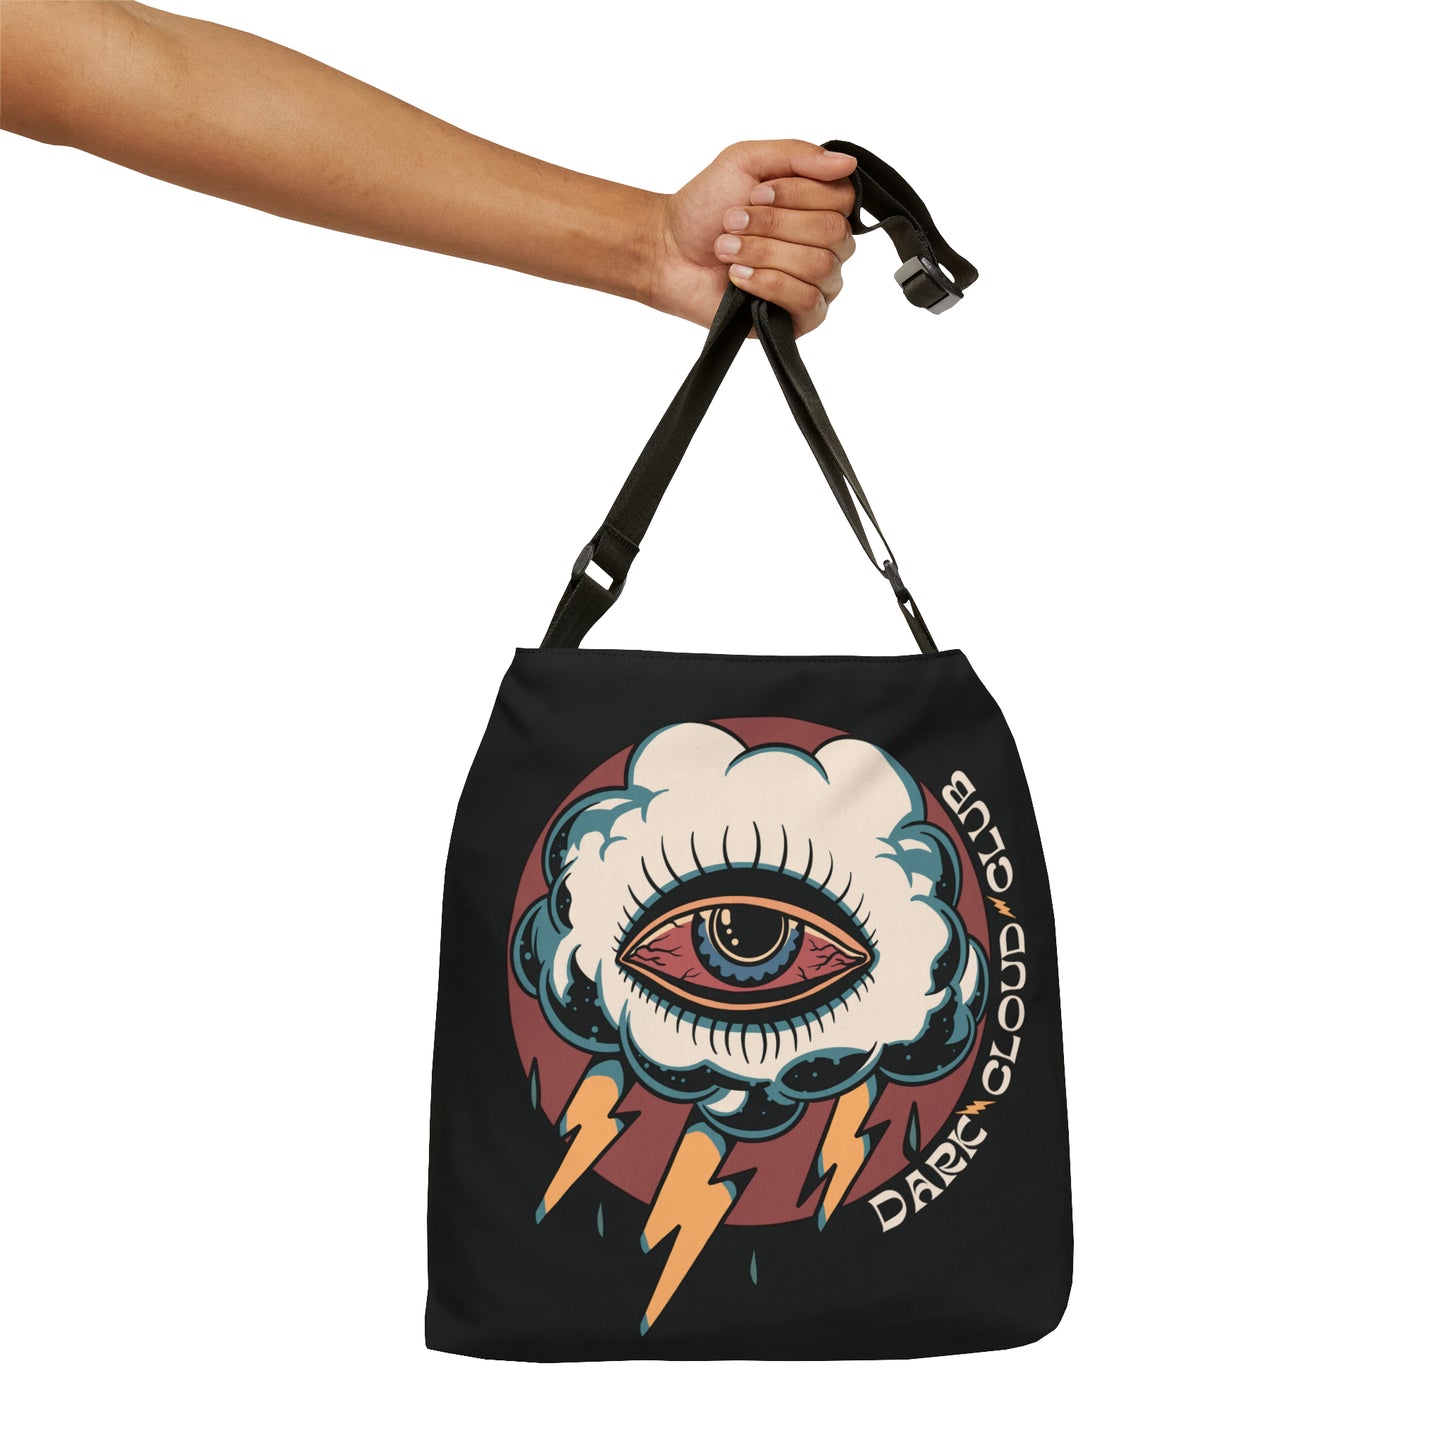 Accessories, All Over Print, AOP, Assembled in the USA, Assembled in USA, Bags, Made in the USA, Made in USA, Outdoor, Polyester, Seasonal Picks, Sublimation, Totes